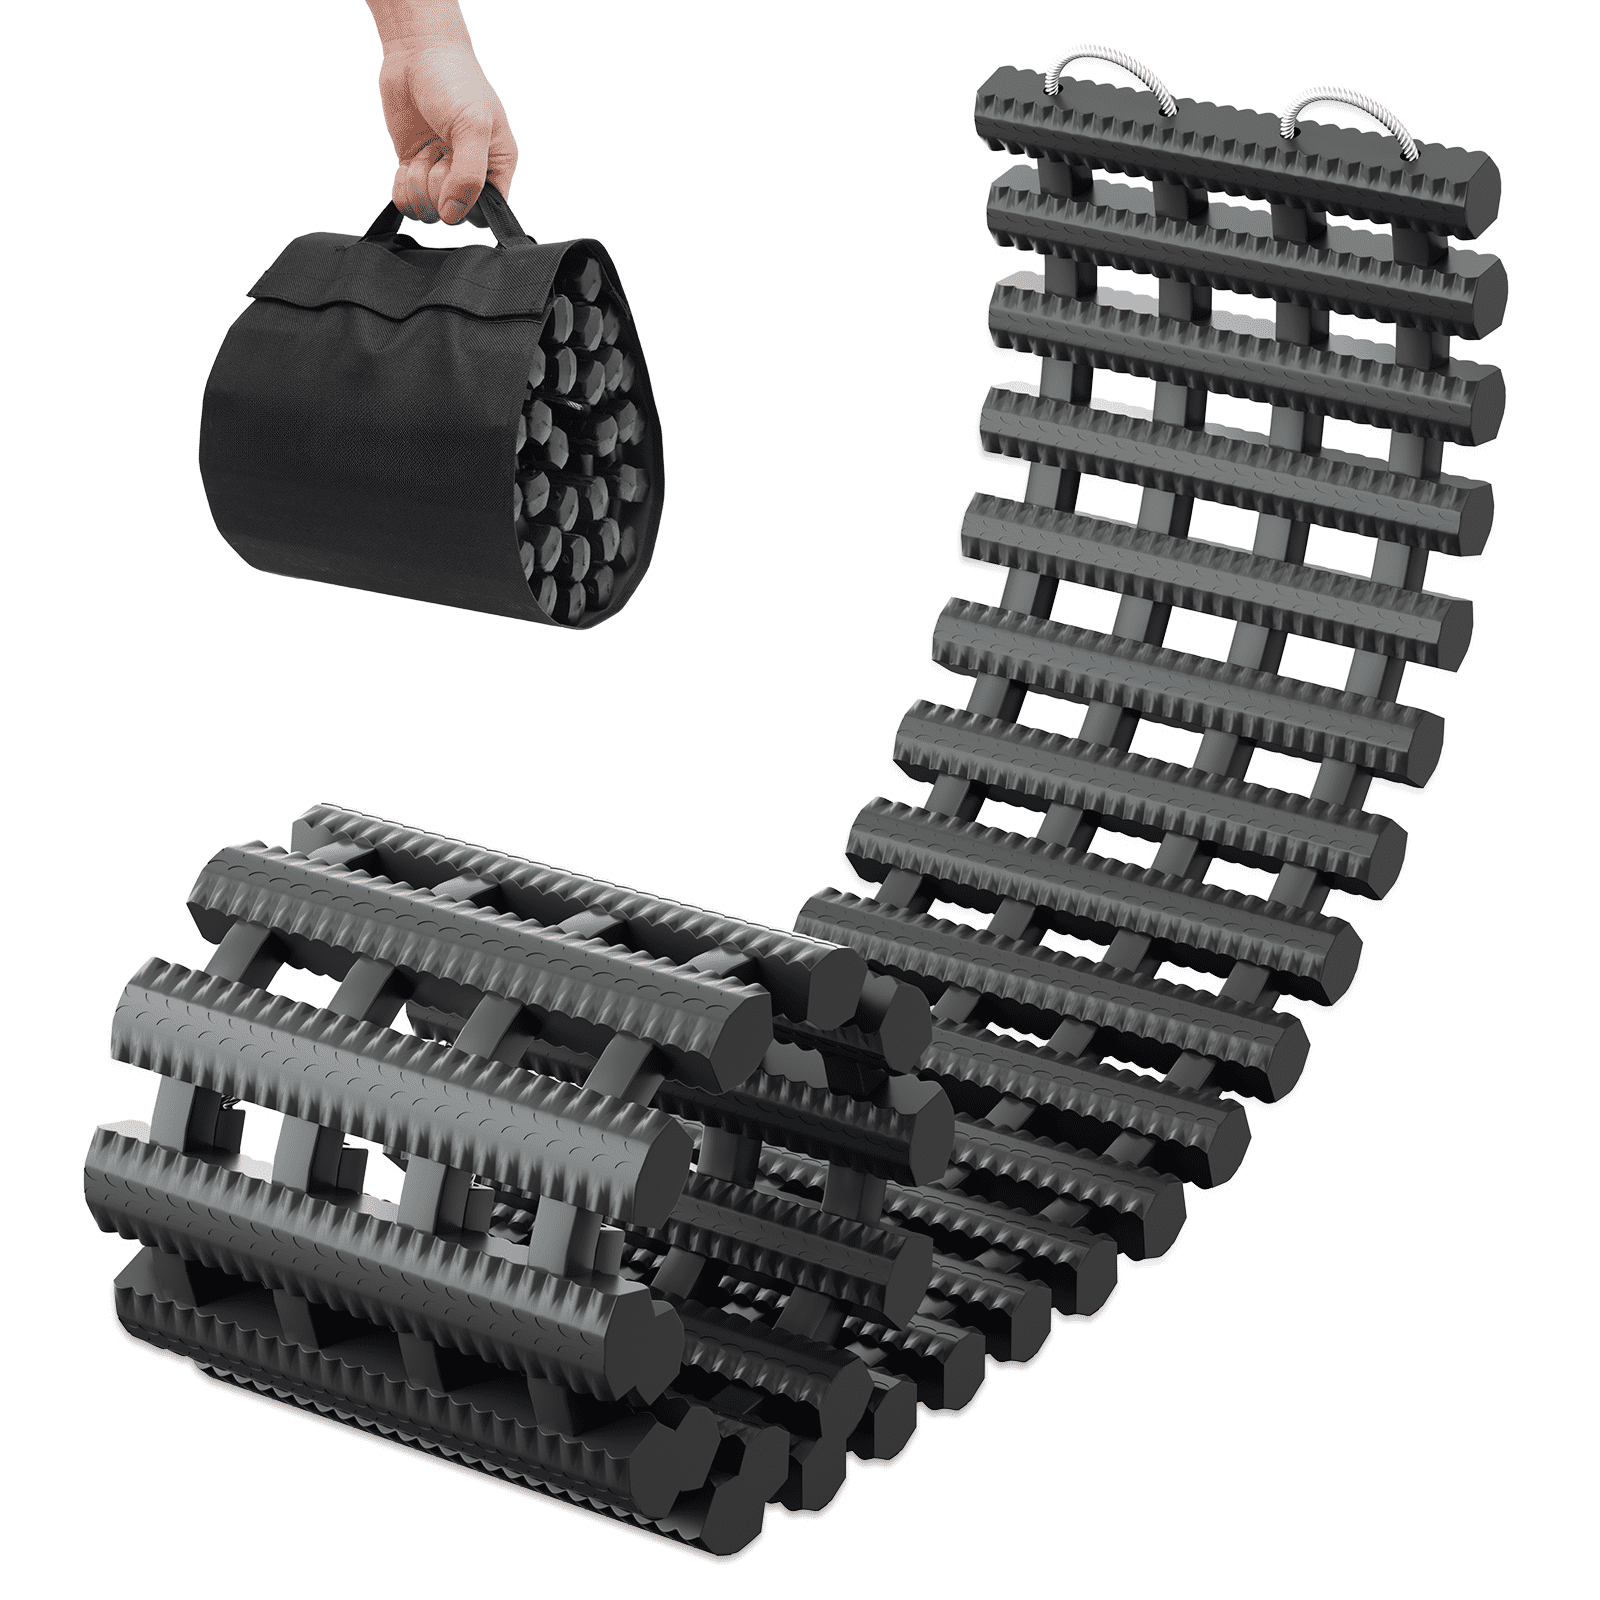  Reliancer 2PC Traction Tracks Mats TPR 31.5 L Tire